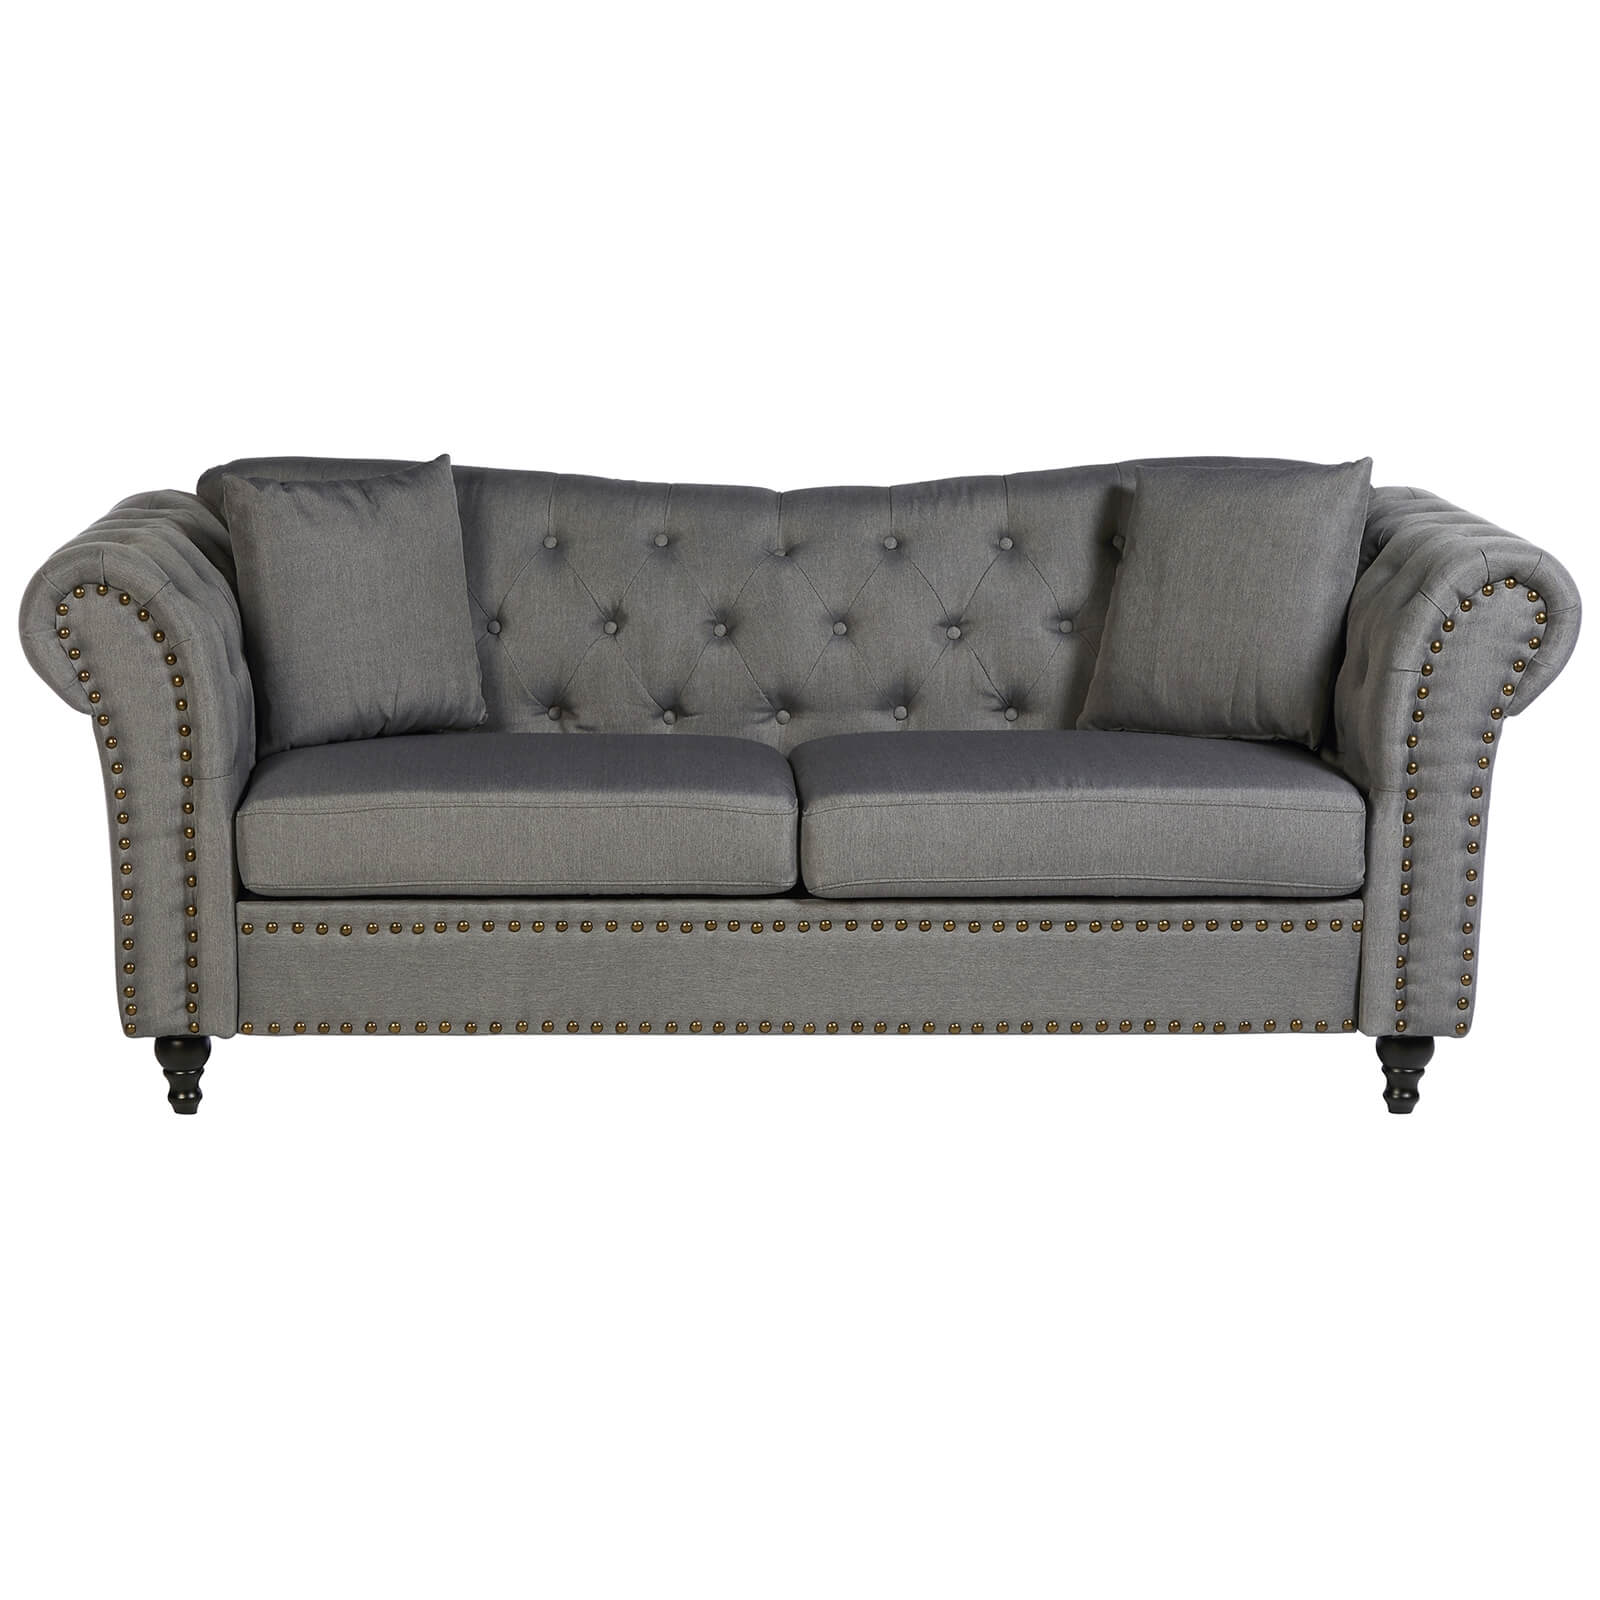 Fable 3 Seat Chesterfield Sofa - Grey